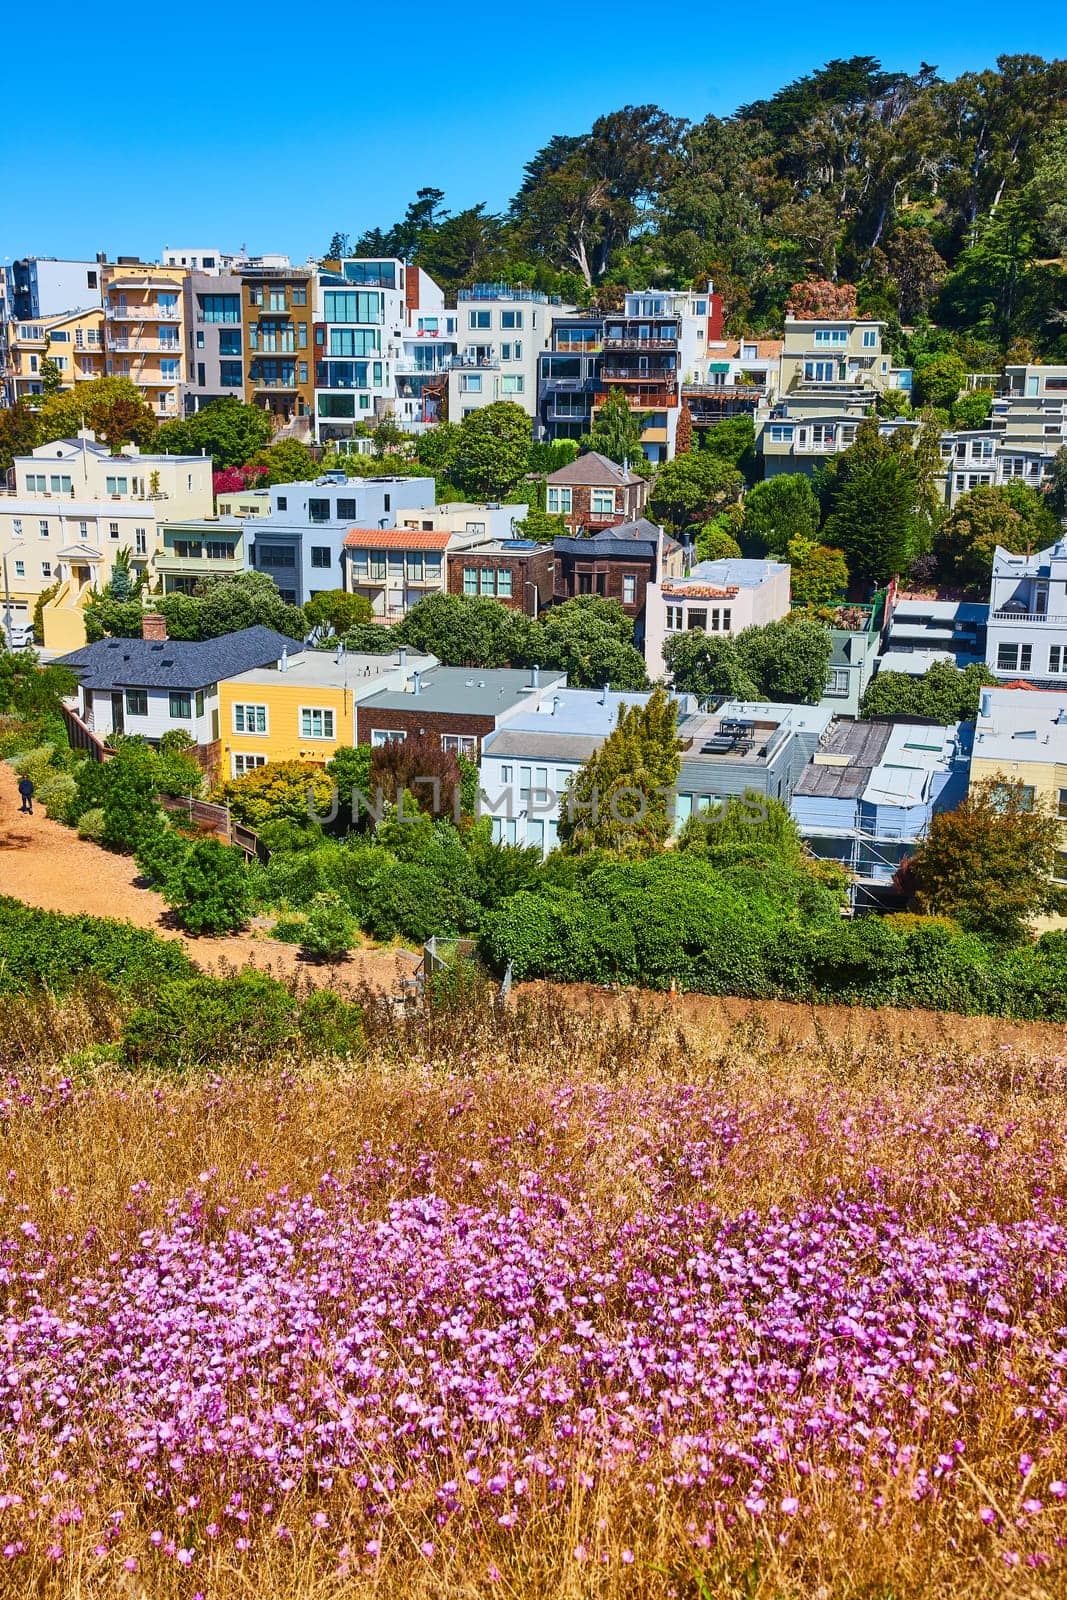 Image of Field of pink flowers with colorful apartment buildings on hill with trees and blue sky background